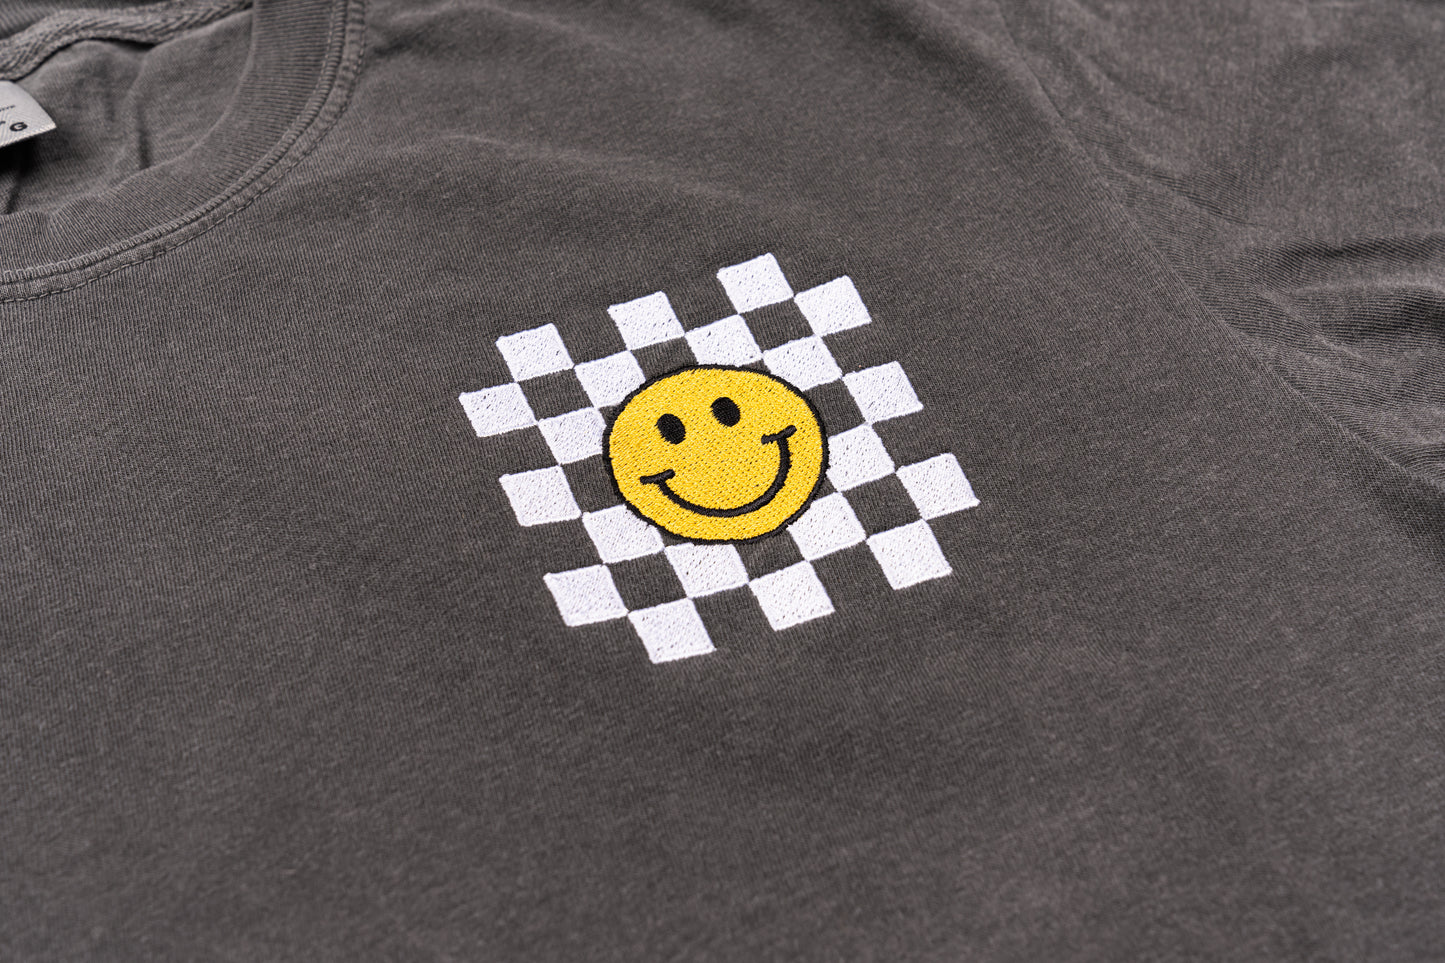 Old School Checkered Smiley - Embroidered Tee (Smoke)